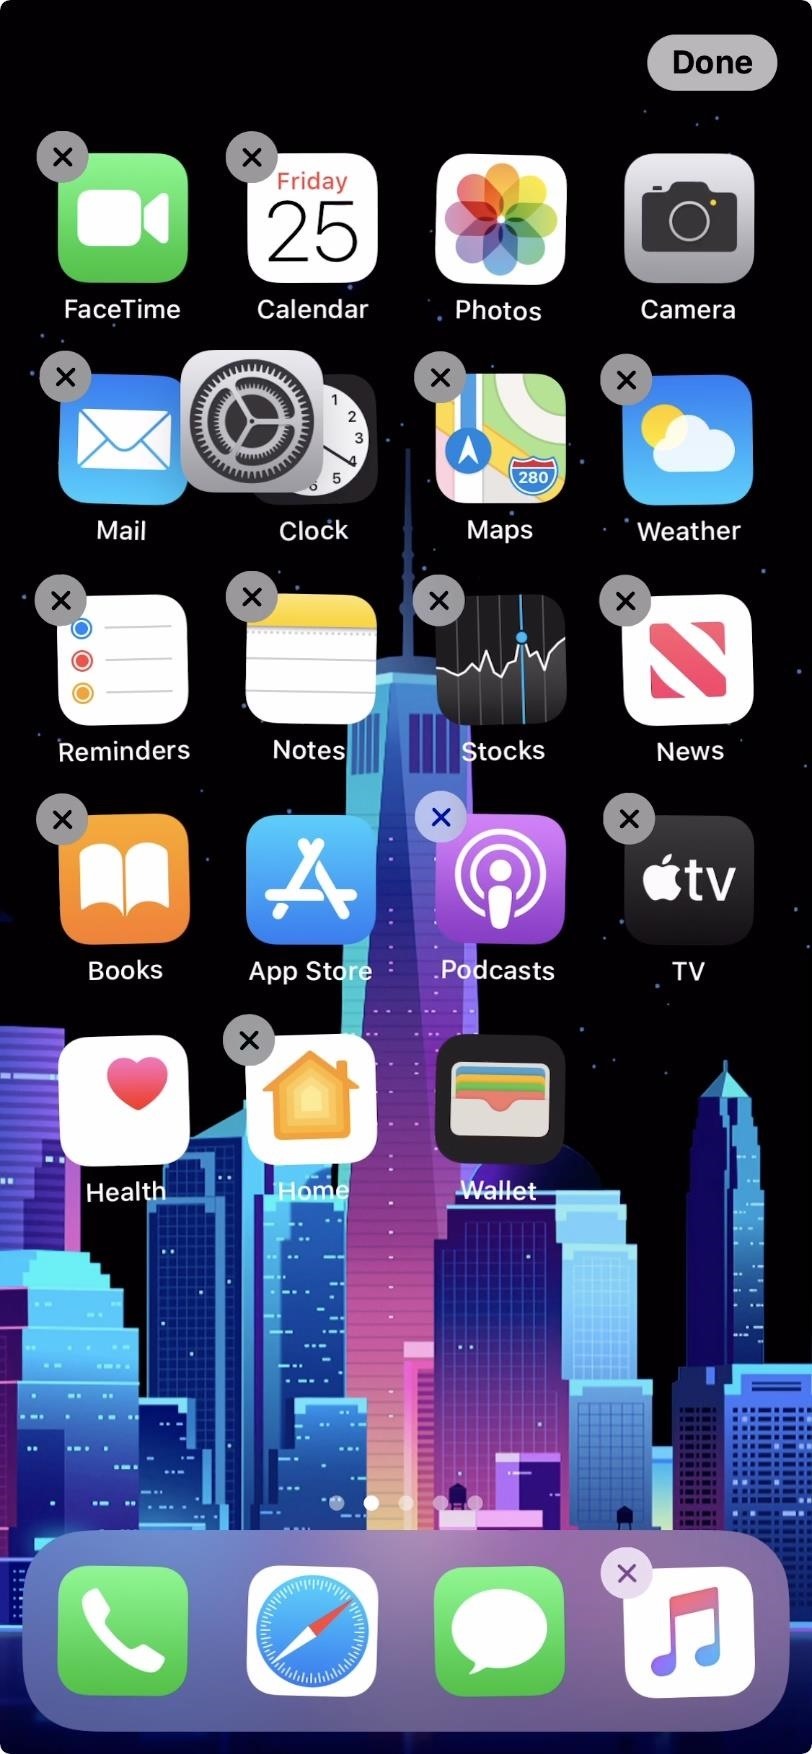 There's a Much Faster Way to Rearrange Your iPhone's Home Screen